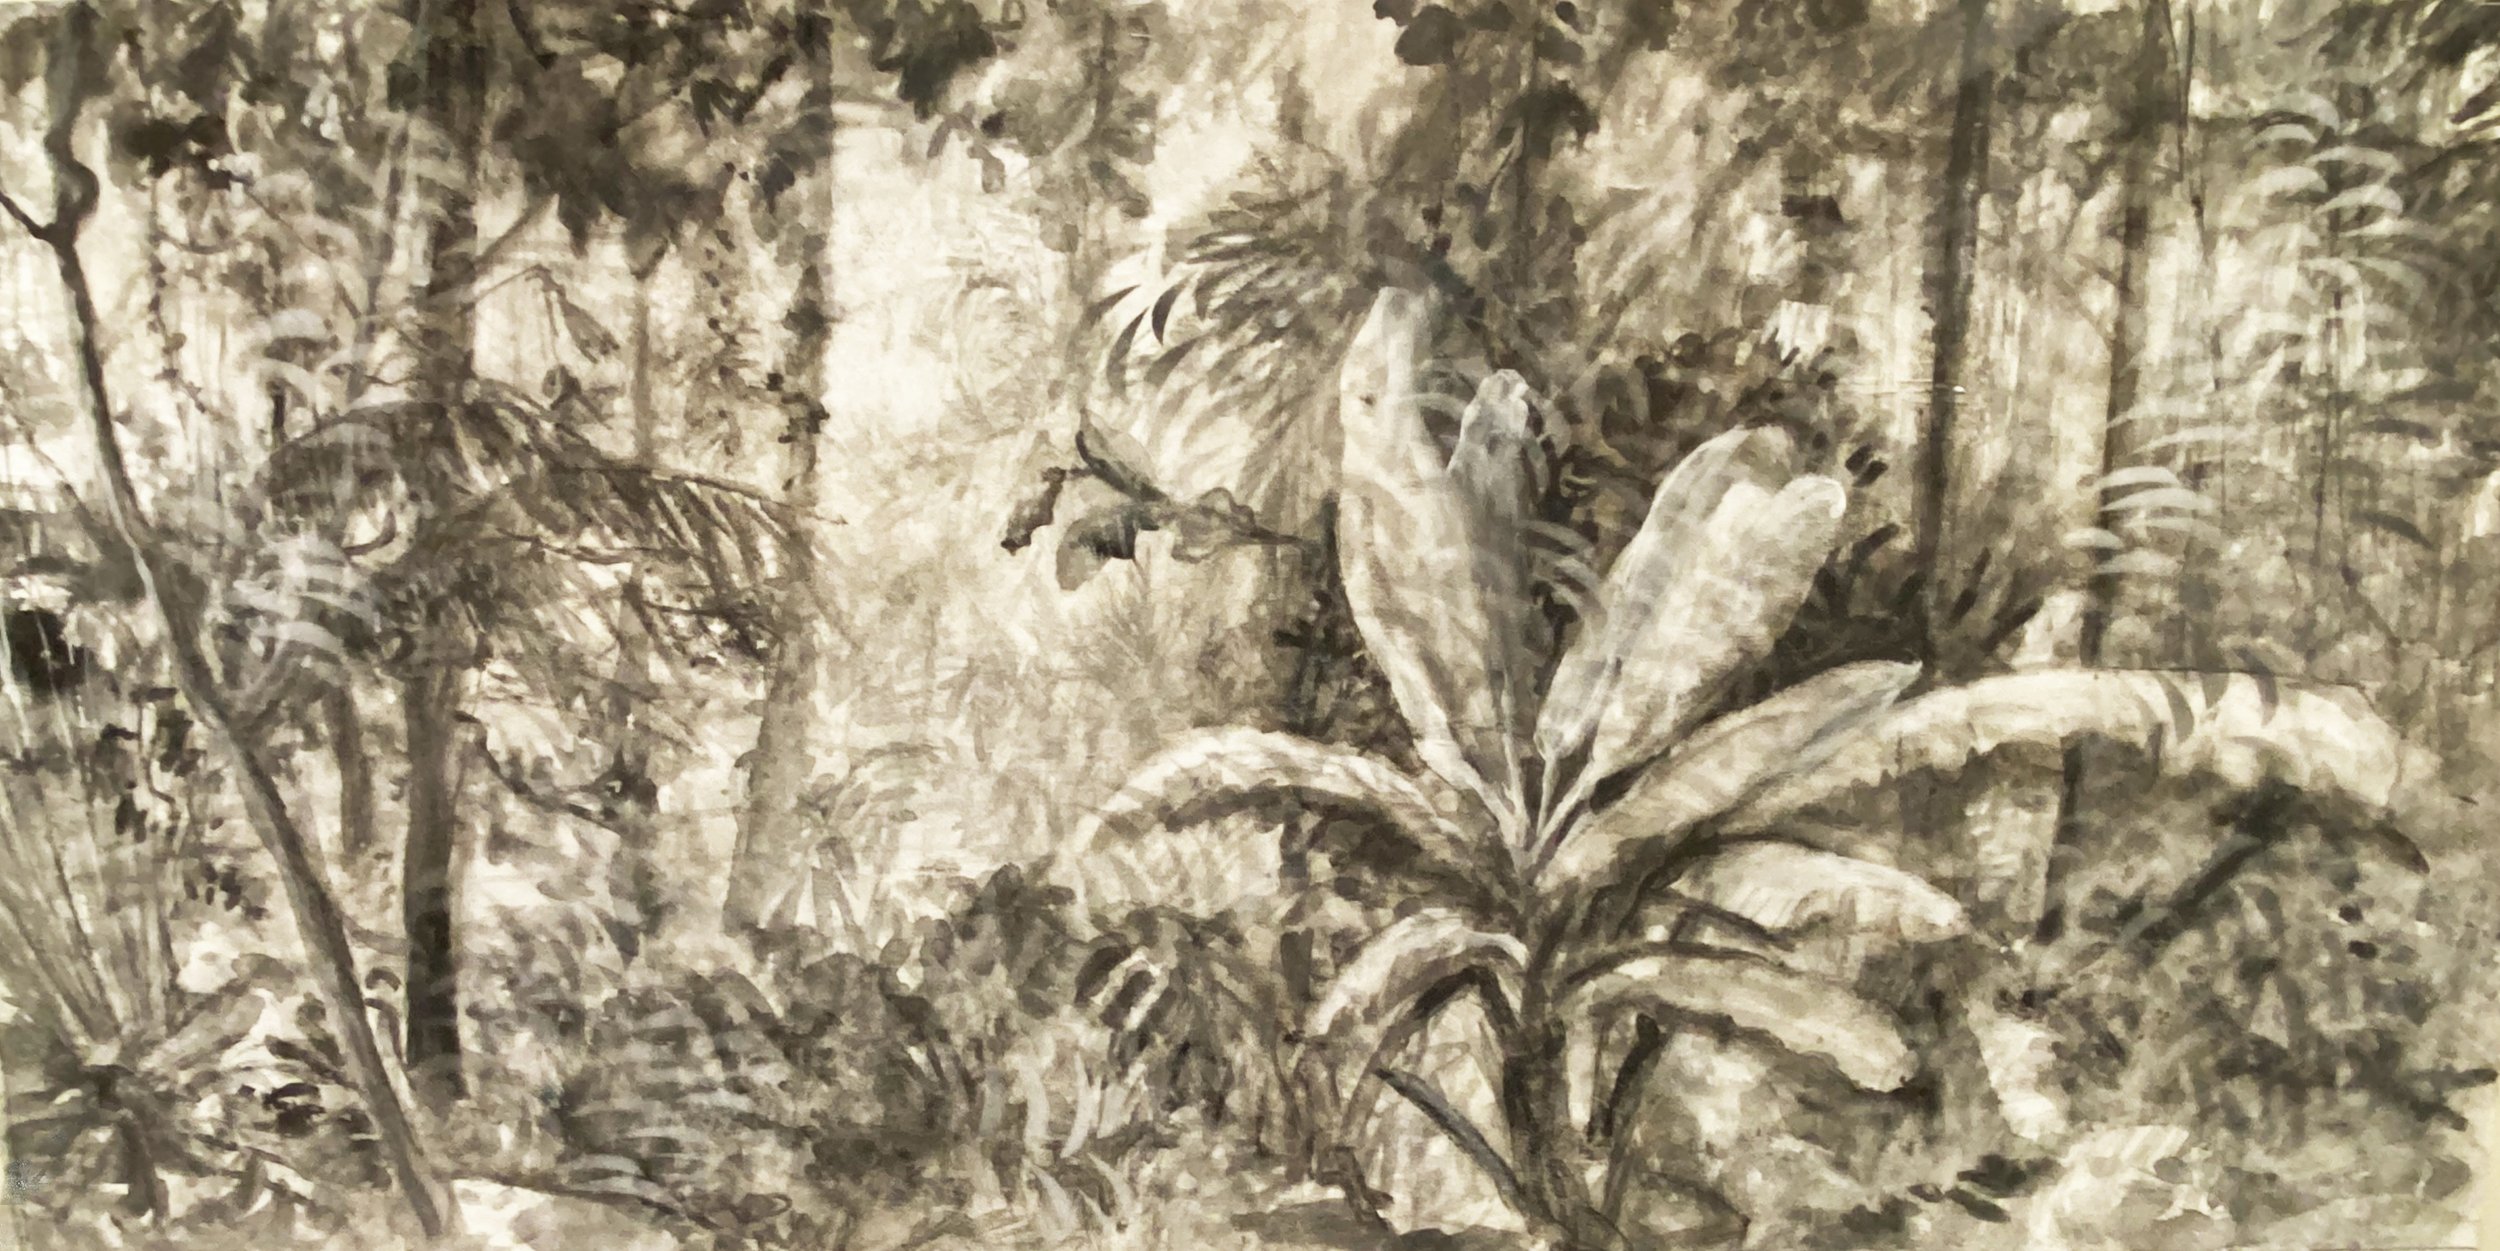   Jennifer Ewing.2023 .Secluded Jungle Mosaic. Ink, Pigment, Chalk on Canvas 28 x 50  